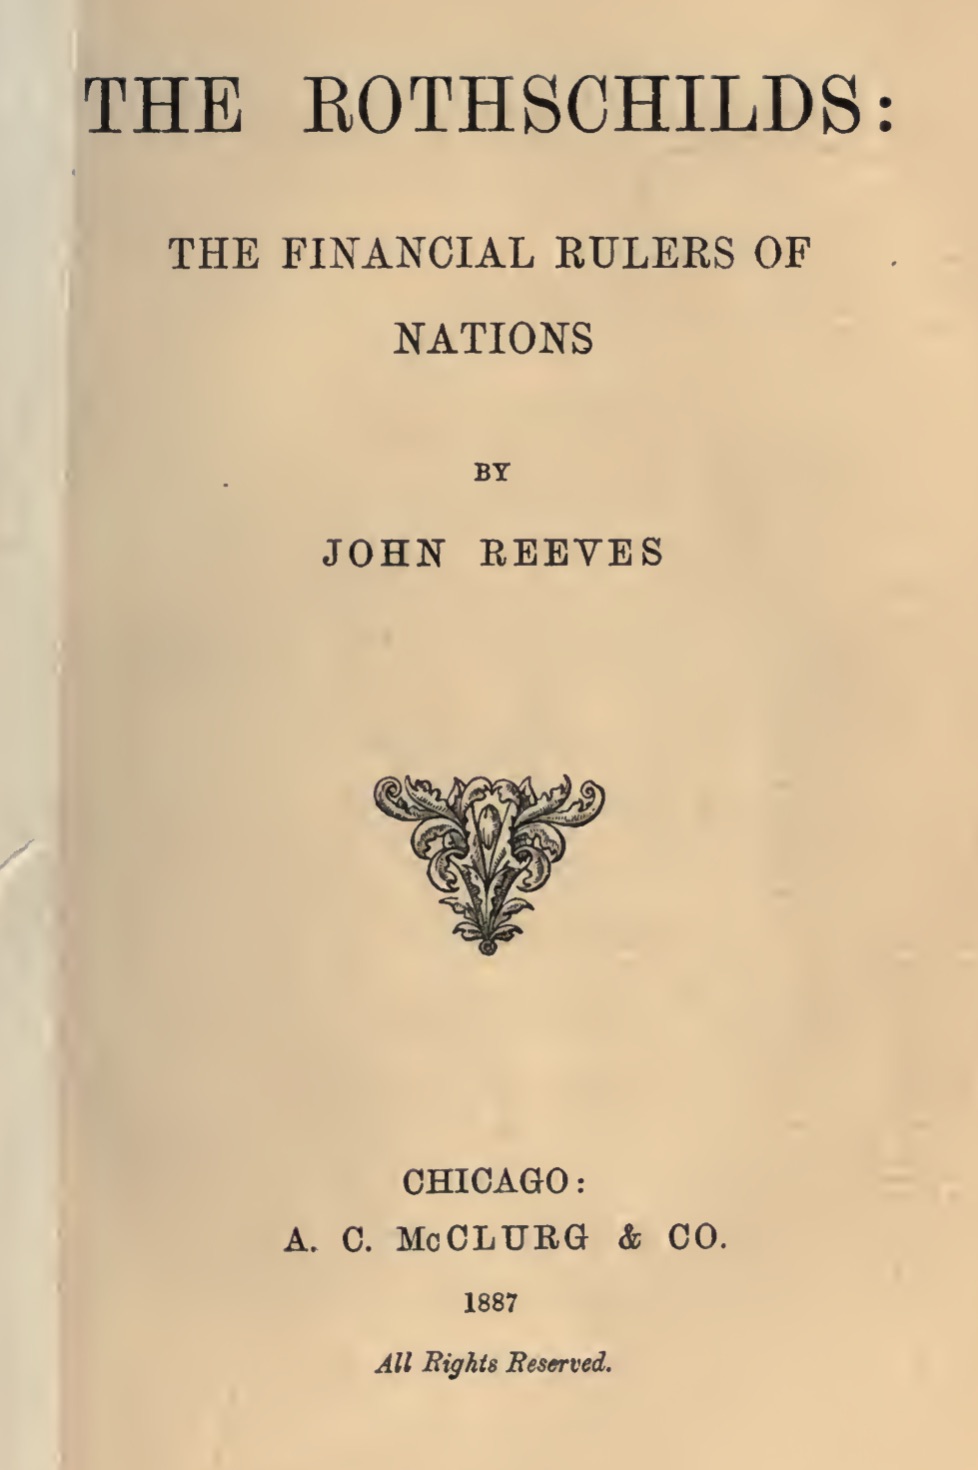 The Rothschilds: The Financial Rulers of Nations (1887) by John Reeves